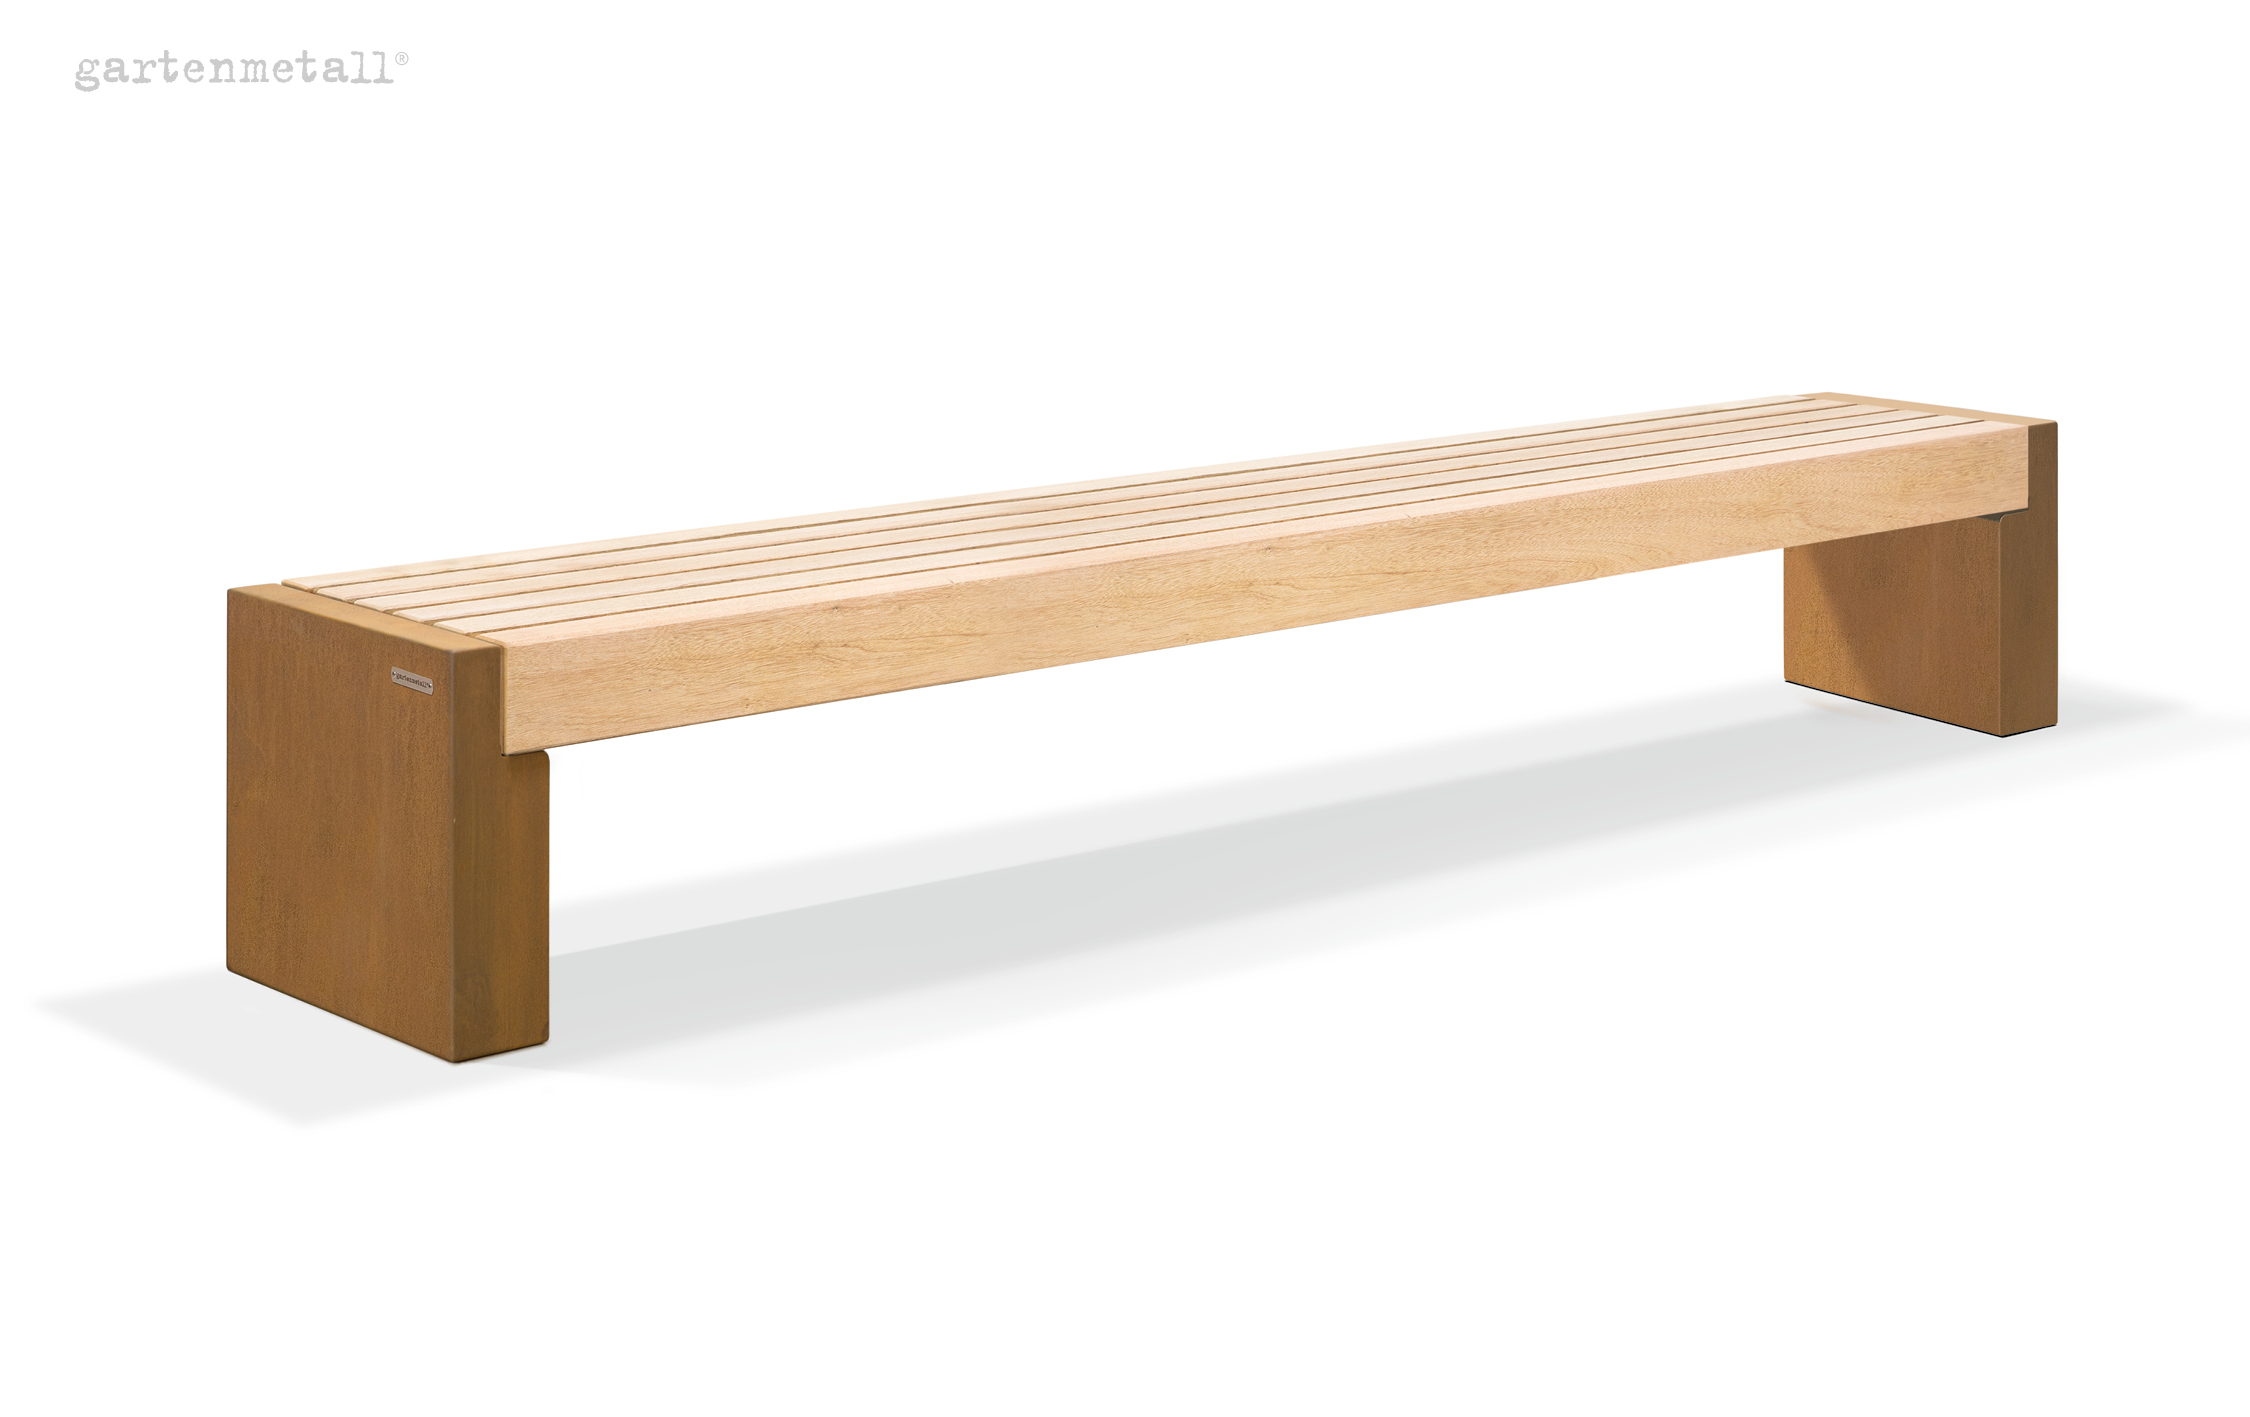 Bench type EMDEN 3.0 m with seat support hardwood